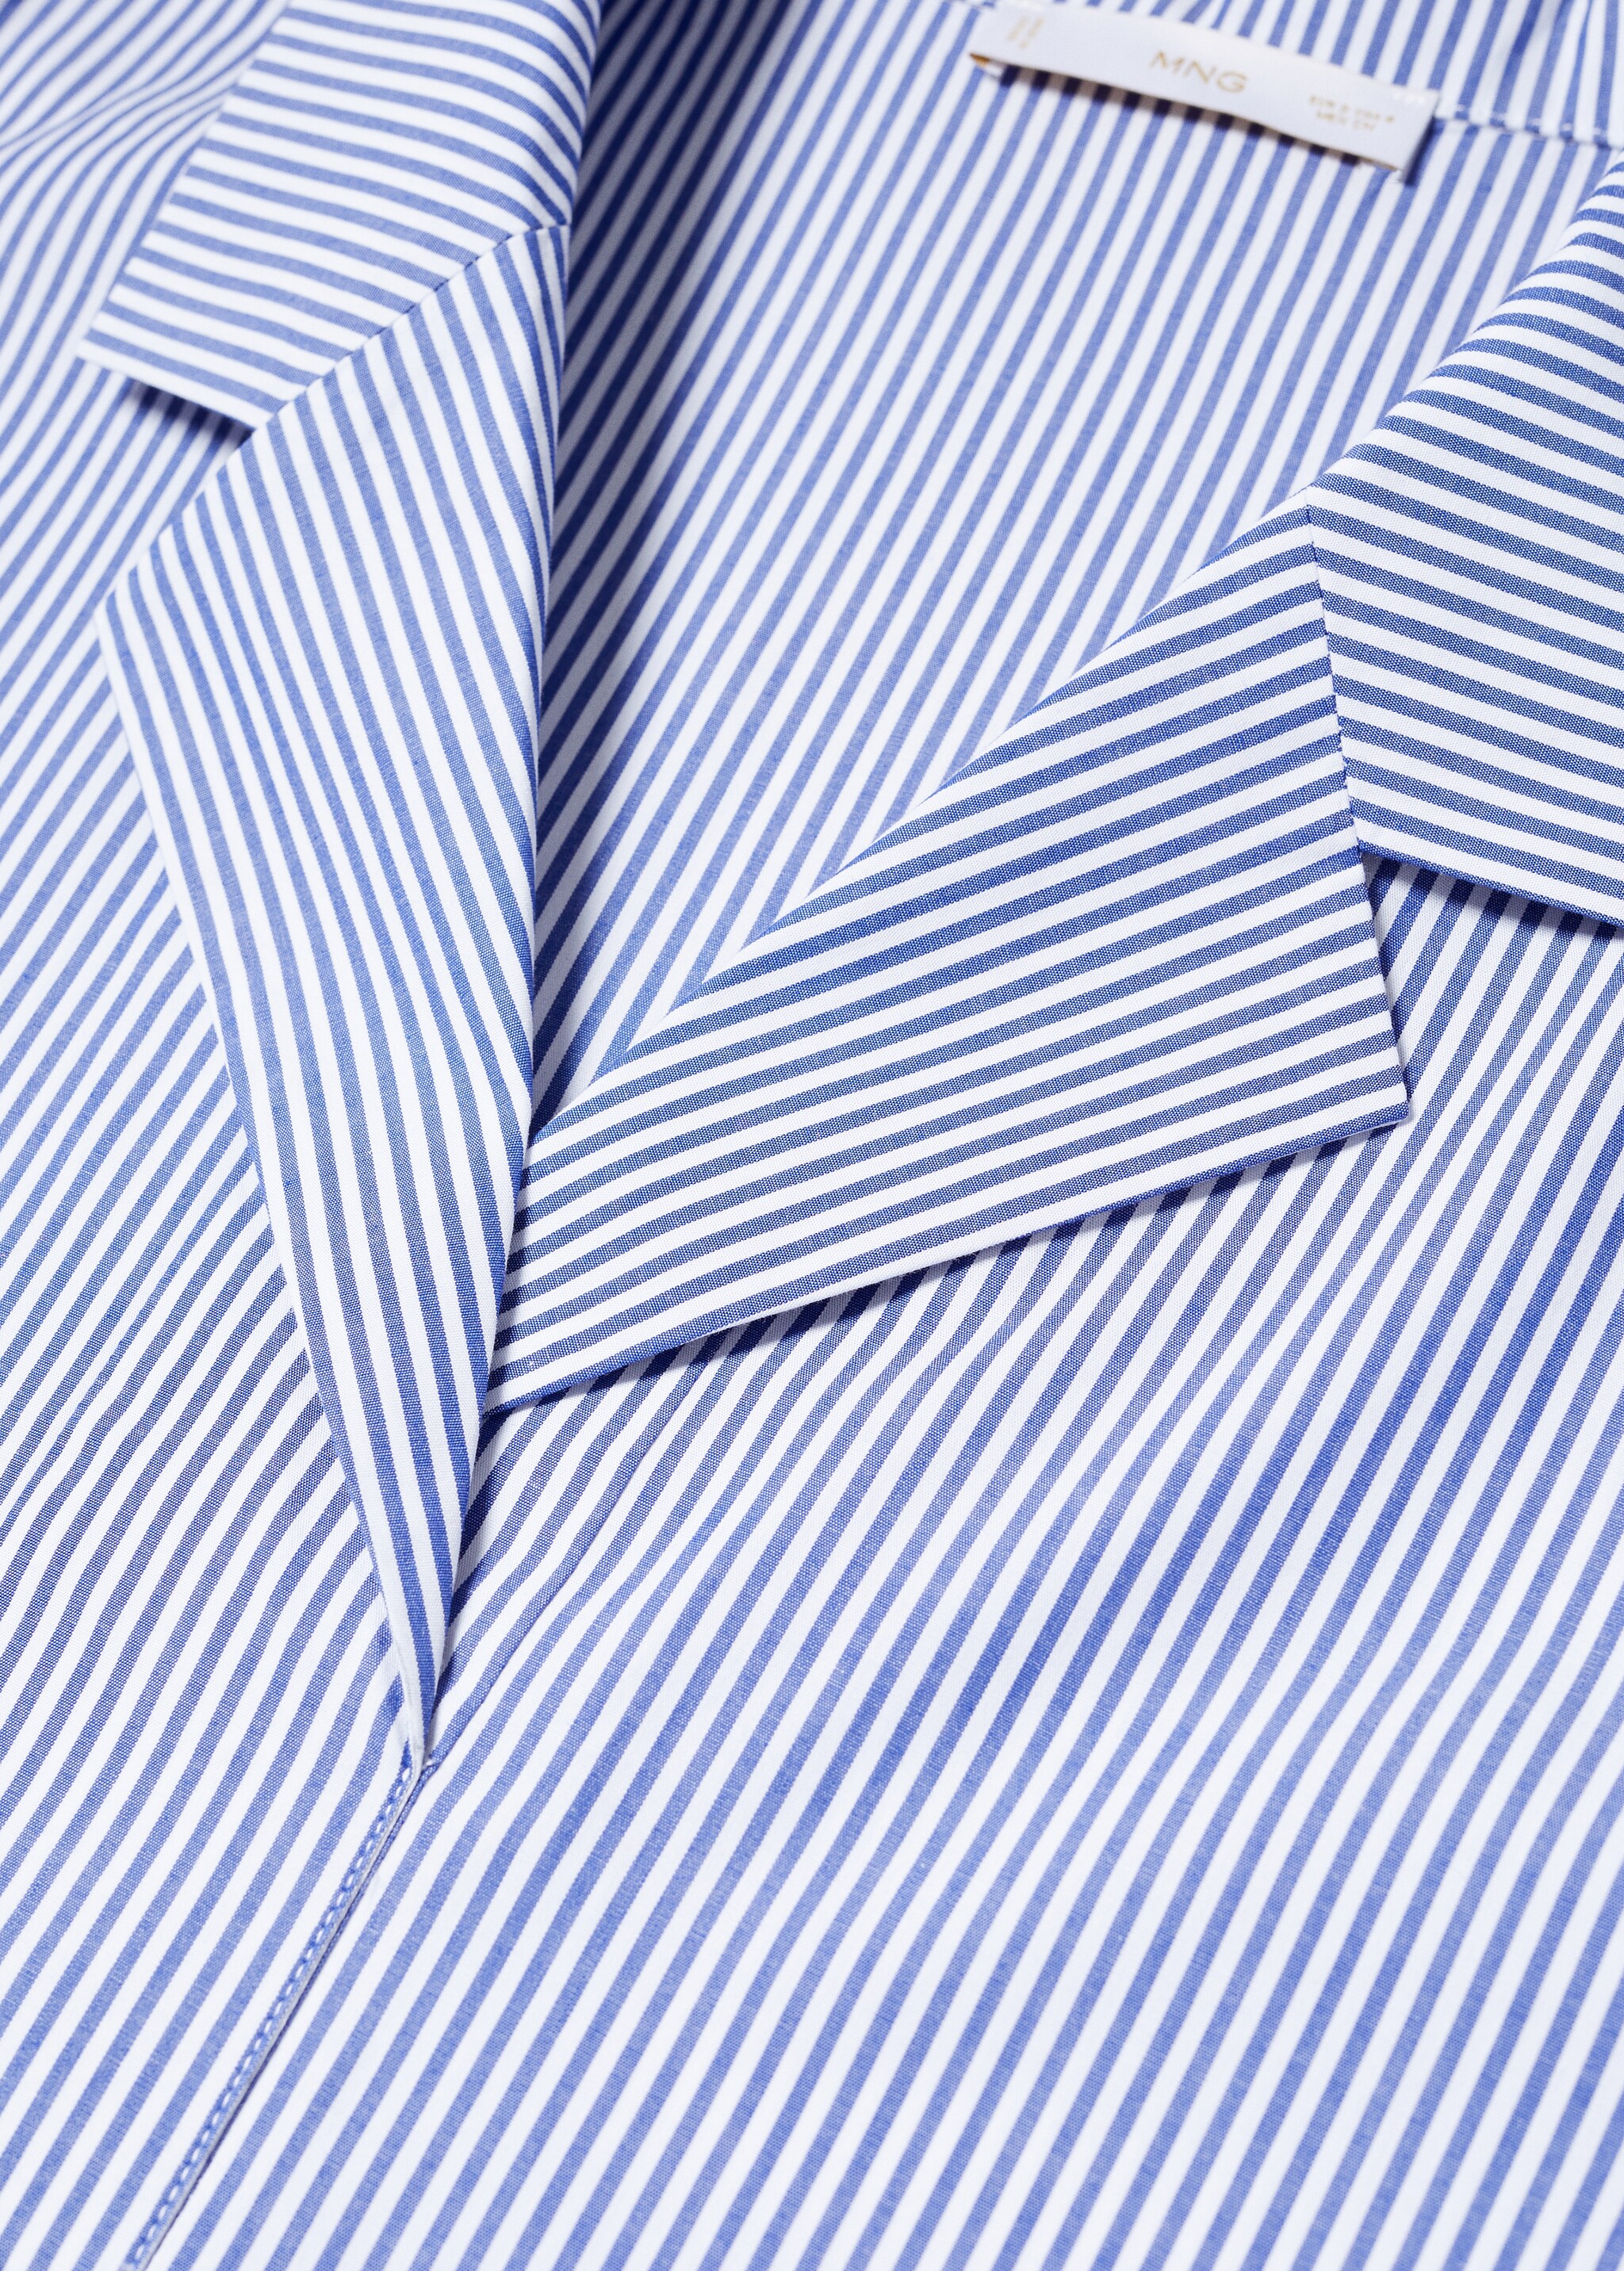 Short sleeve striped shirt - Details of the article 8